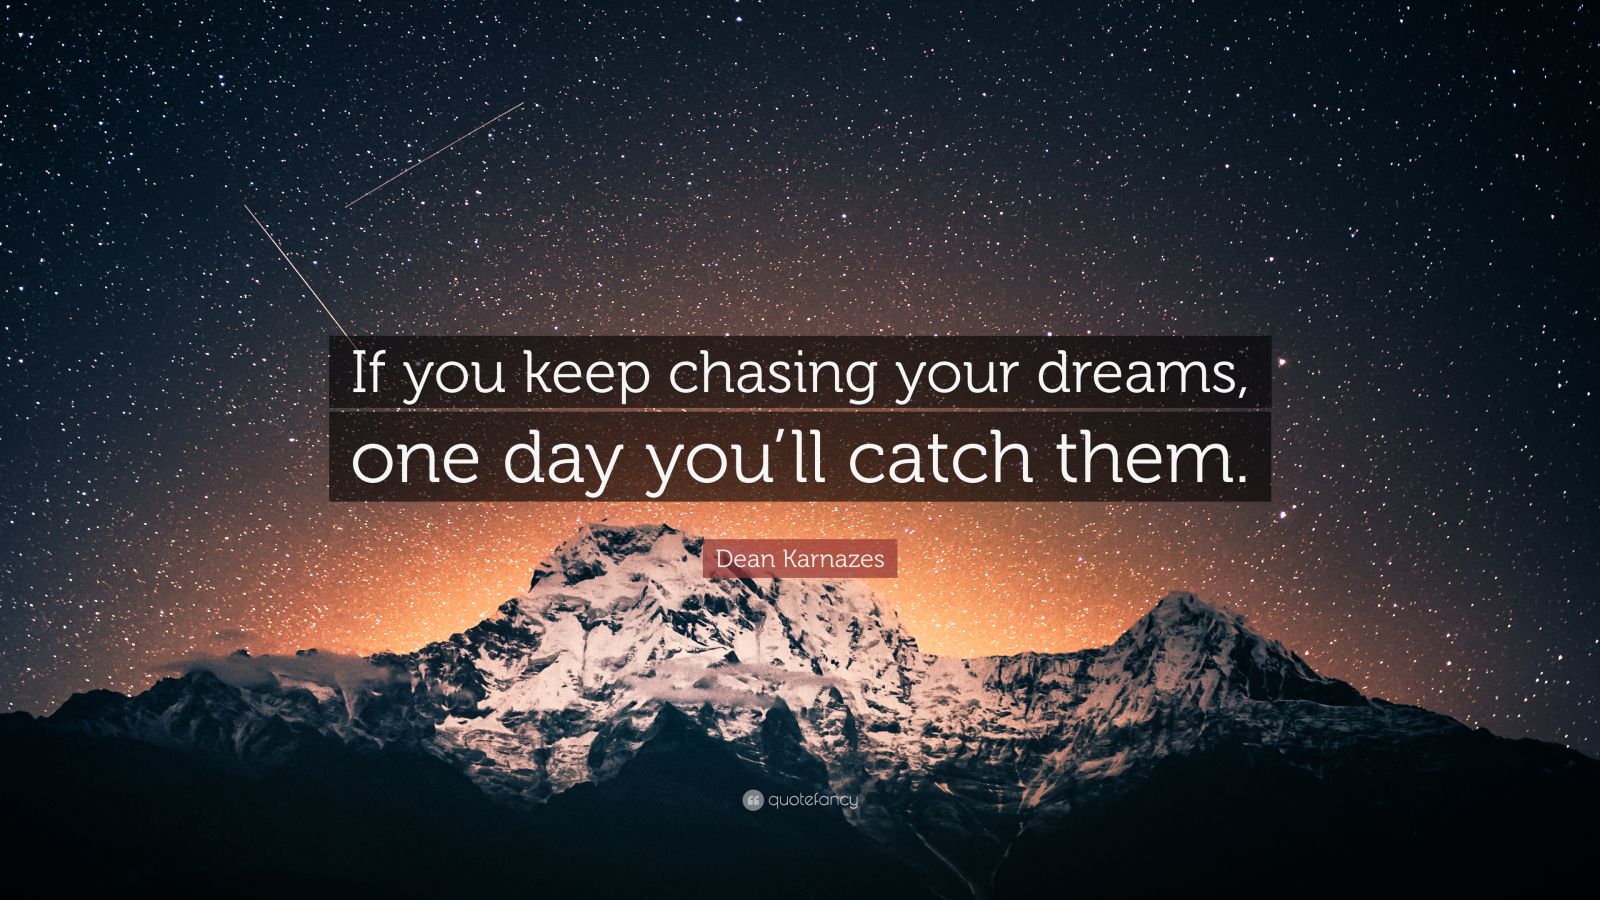 Dean Karnazes Quote: “If you keep chasing your dreams, one day you’ll